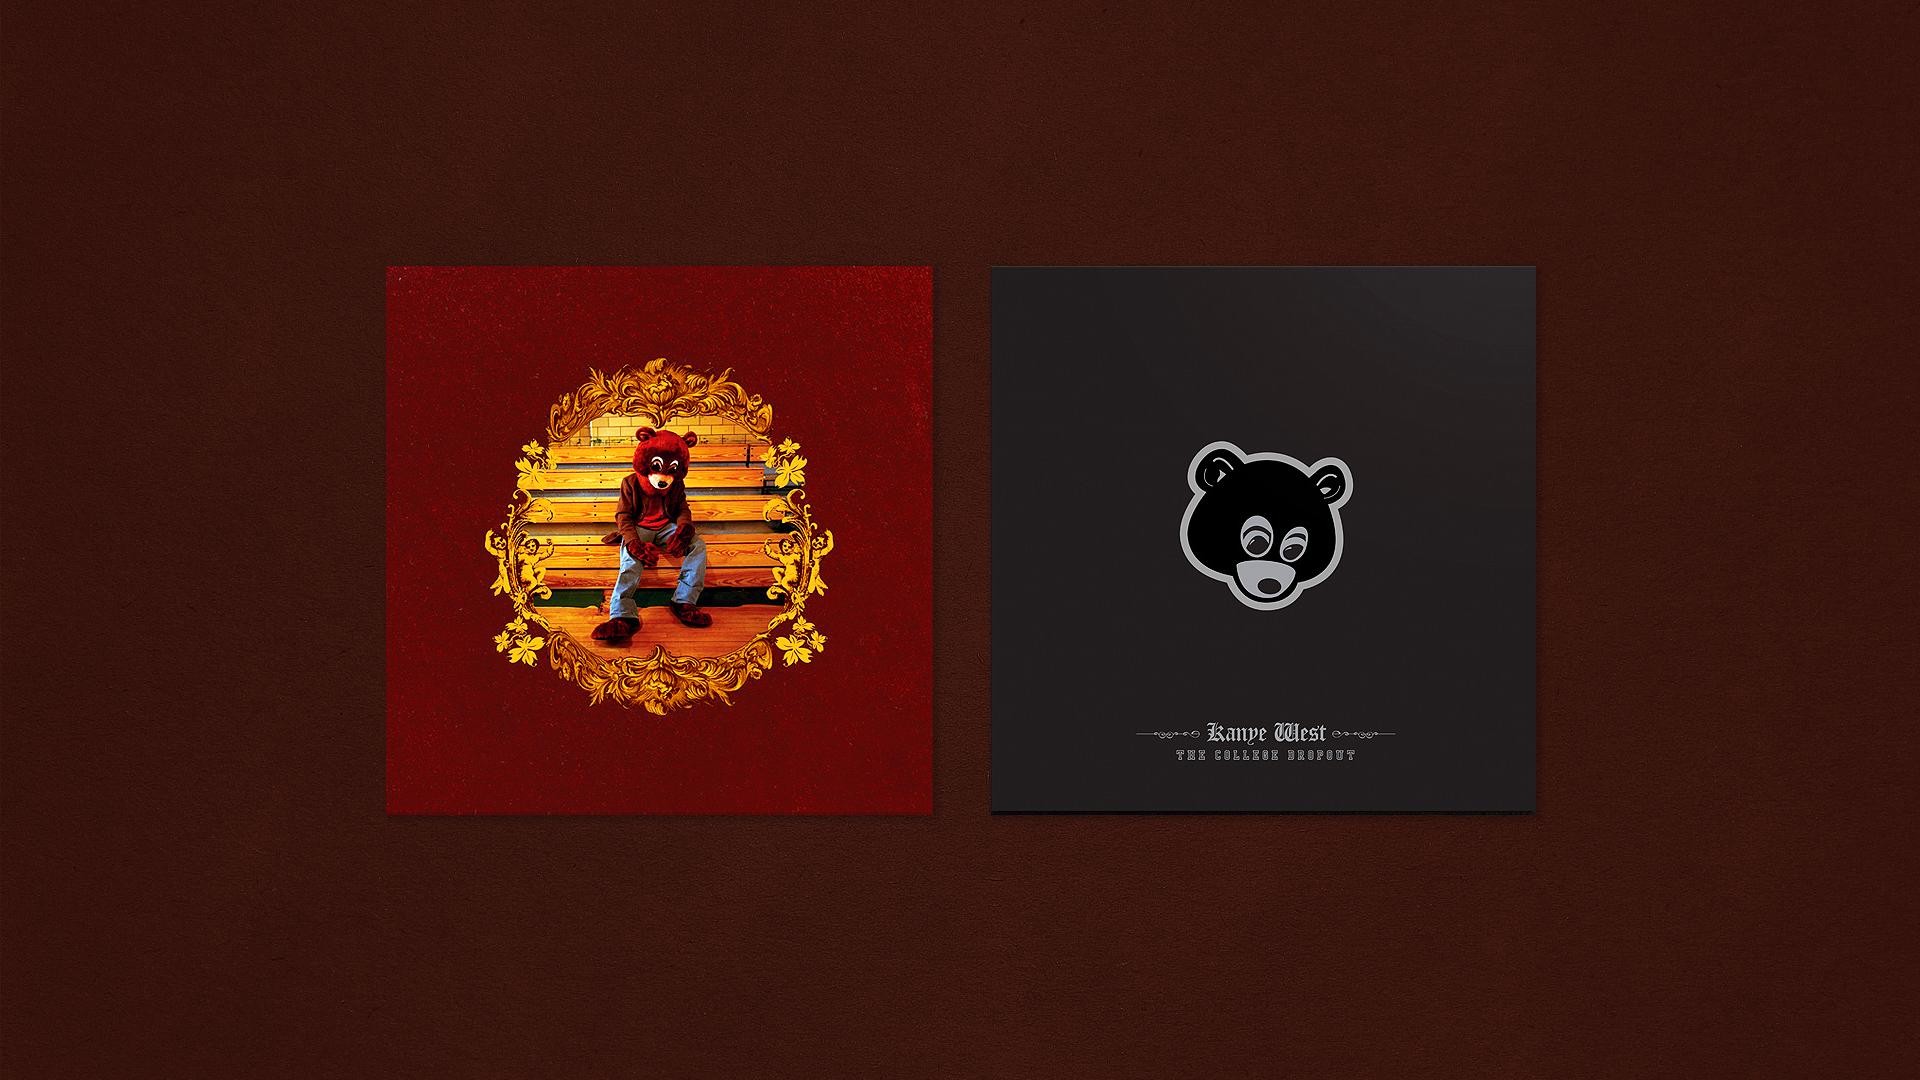 … the-college-dropout-wallpapers-1 …